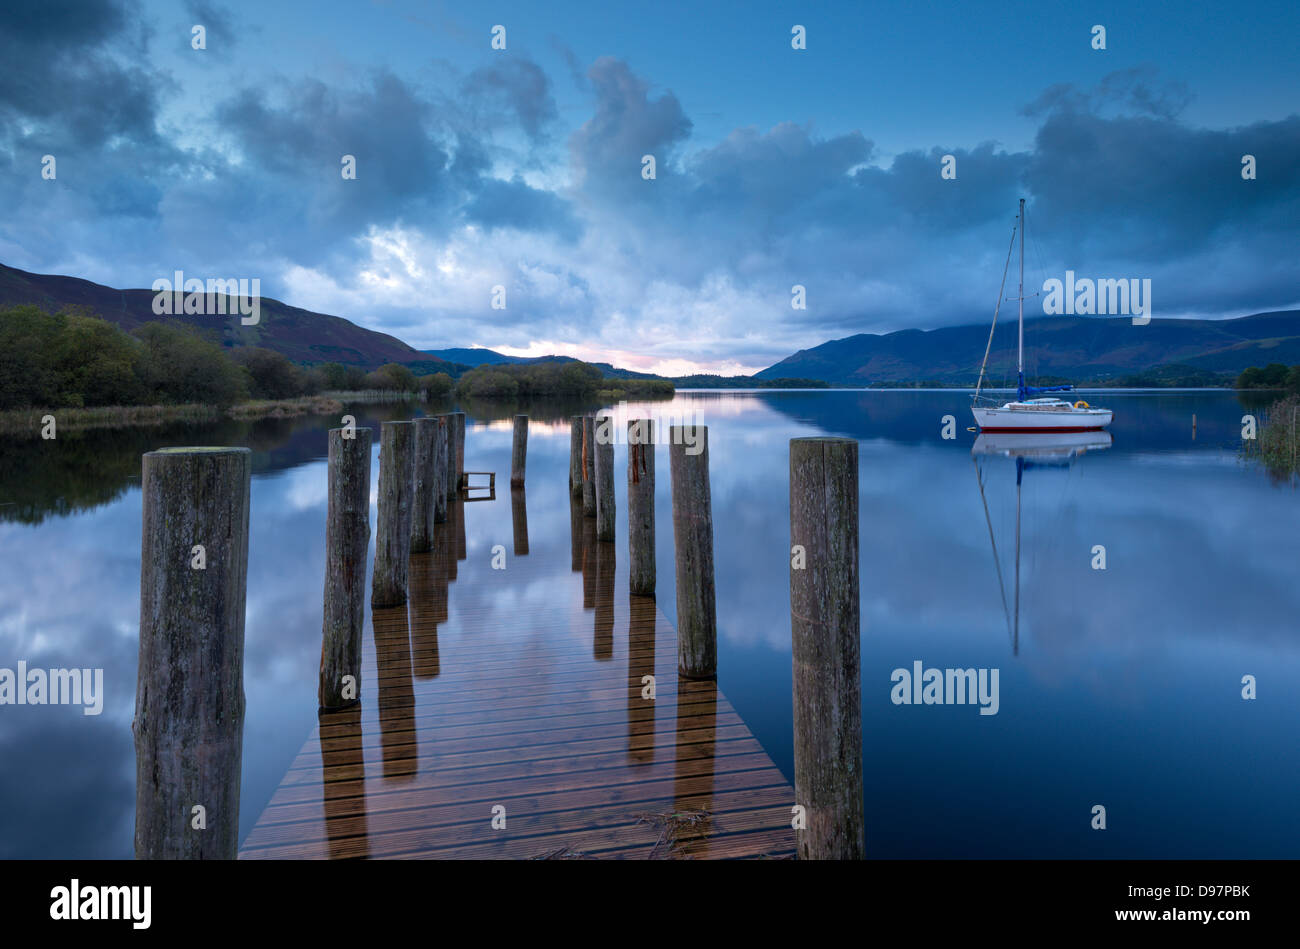 Wooden jetty and yacht on Derwent Water near Lodore, Lake District, Cumbria, England. Autumn (October) 2012. Stock Photo